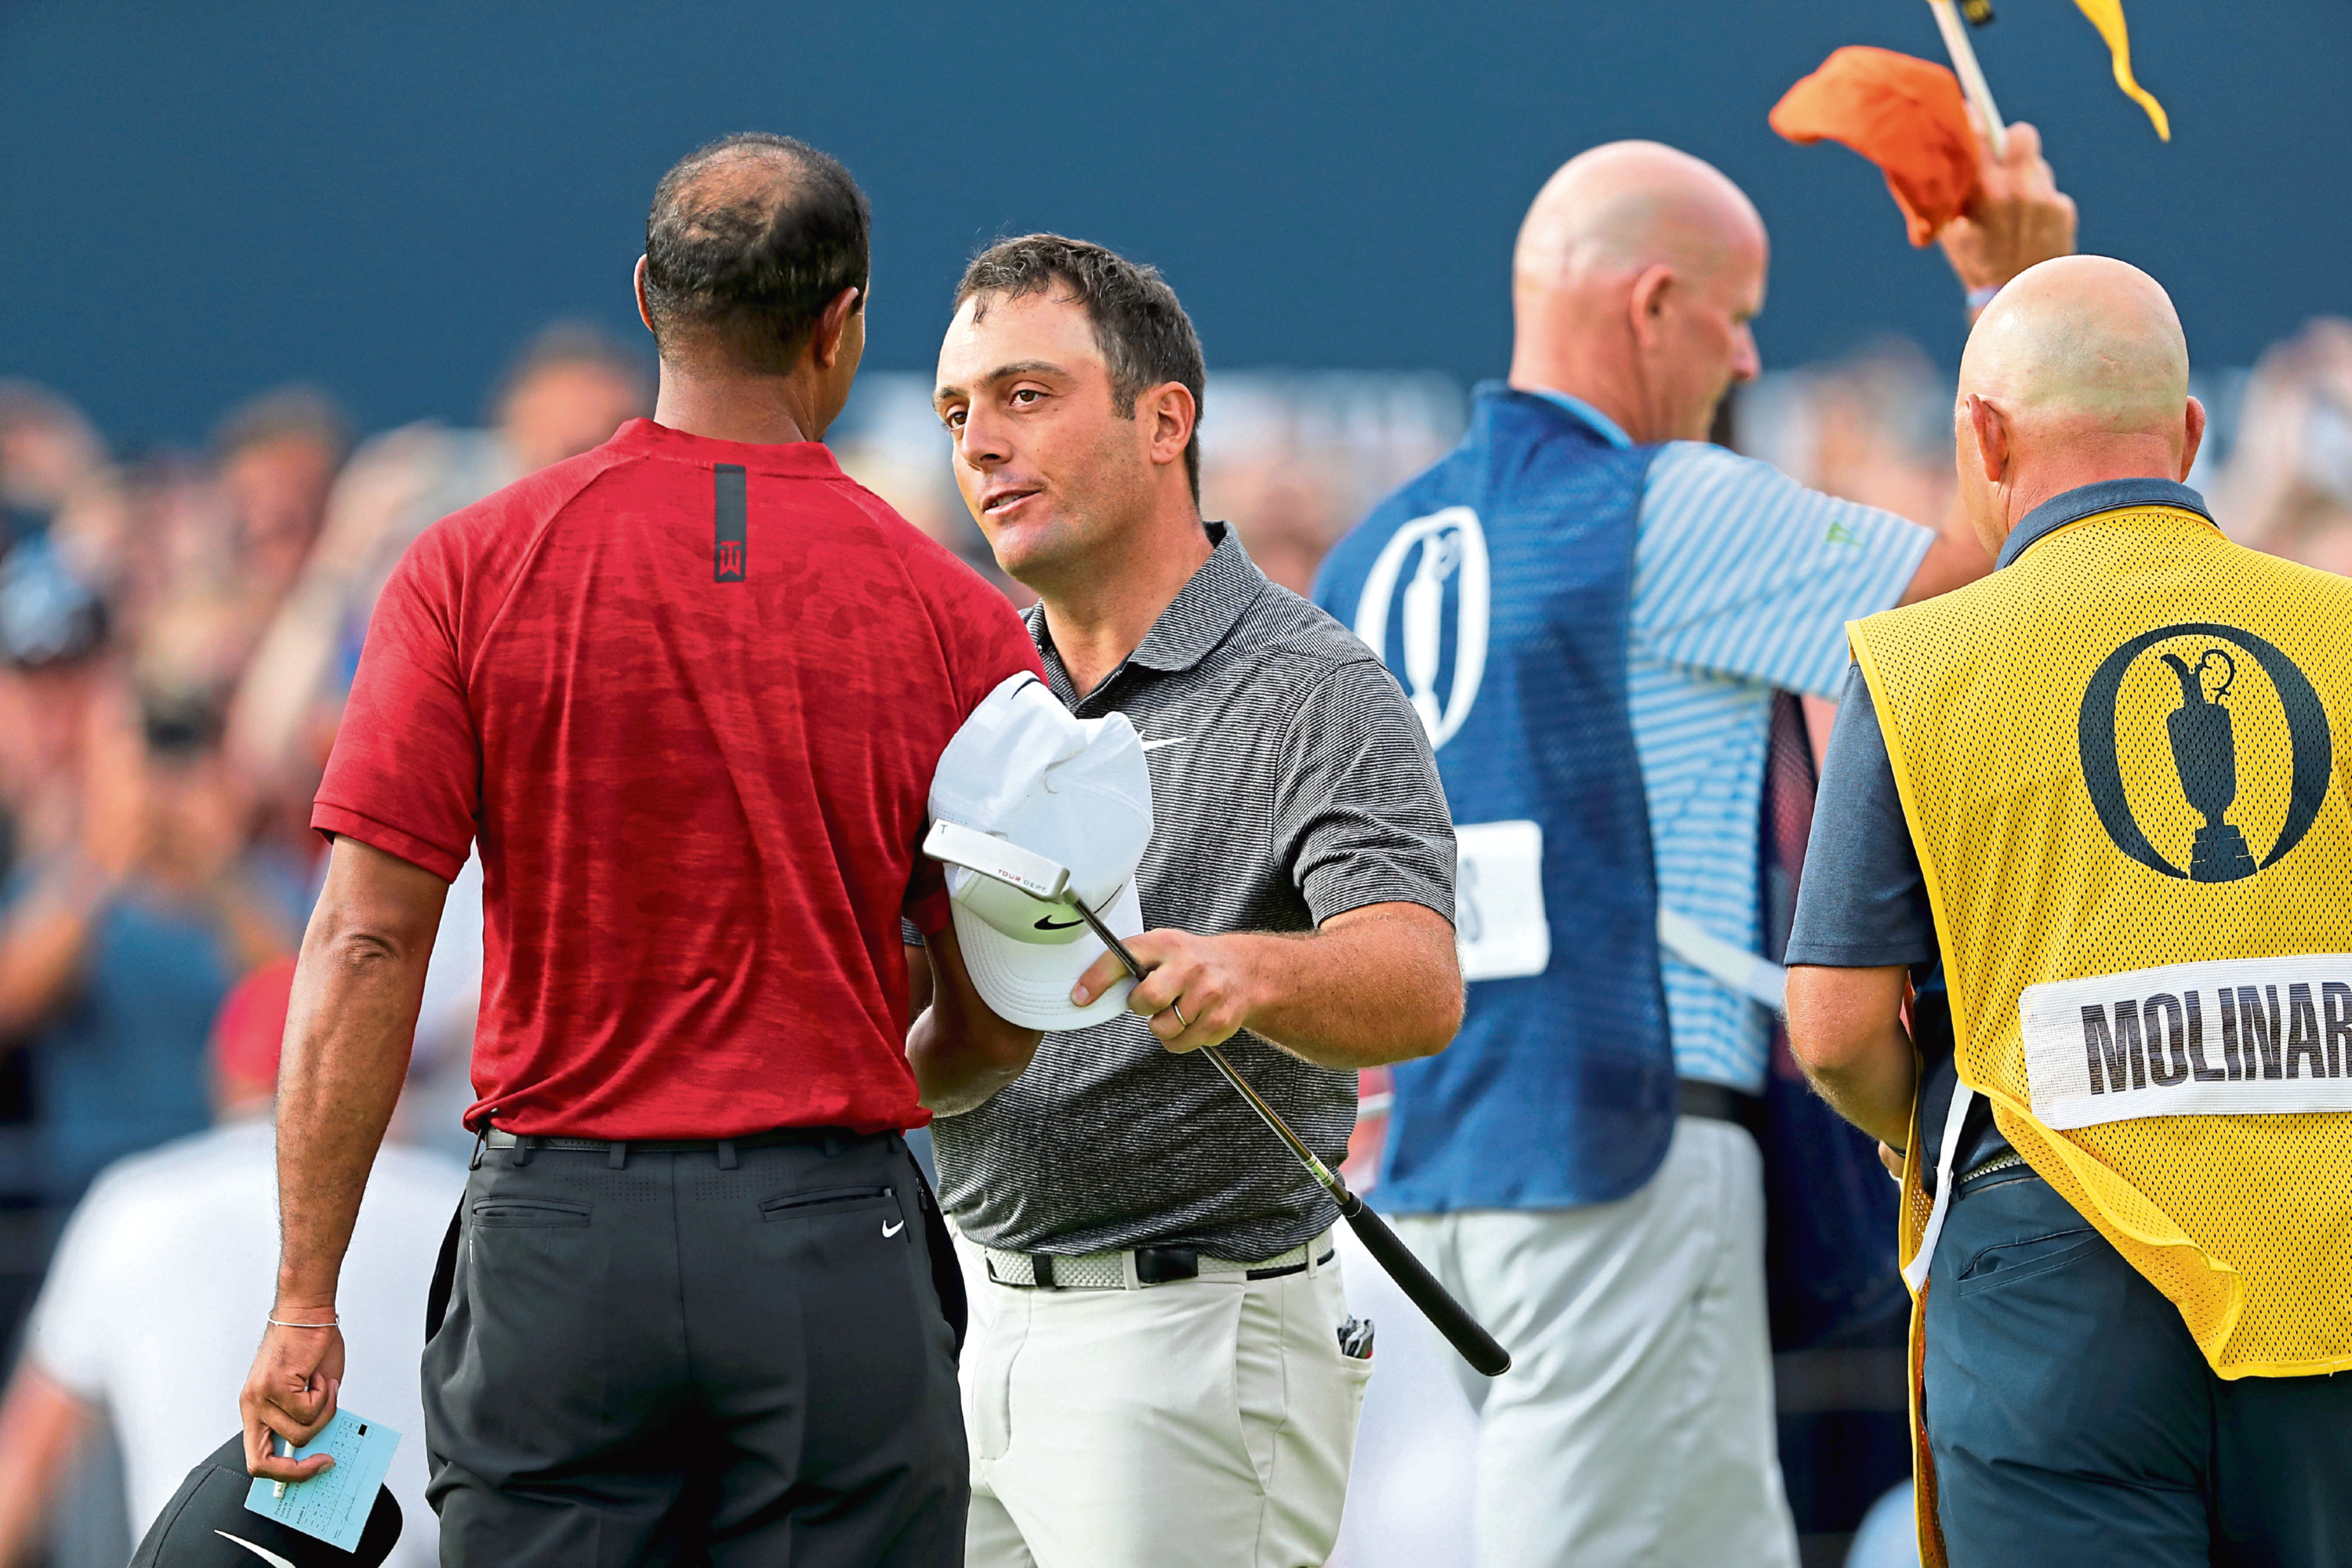 CARNOUSTIE, SCOTLAND - JULY 22:  Francesco Molinari of Italy shakes hands with his playing partner Tiger Woods of the United States during the final round of the 147th Open Championship at Carnoustie Golf Club on July 22, 2018 in Carnoustie, Scotland.  (Photo by David Cannon/Getty Images)